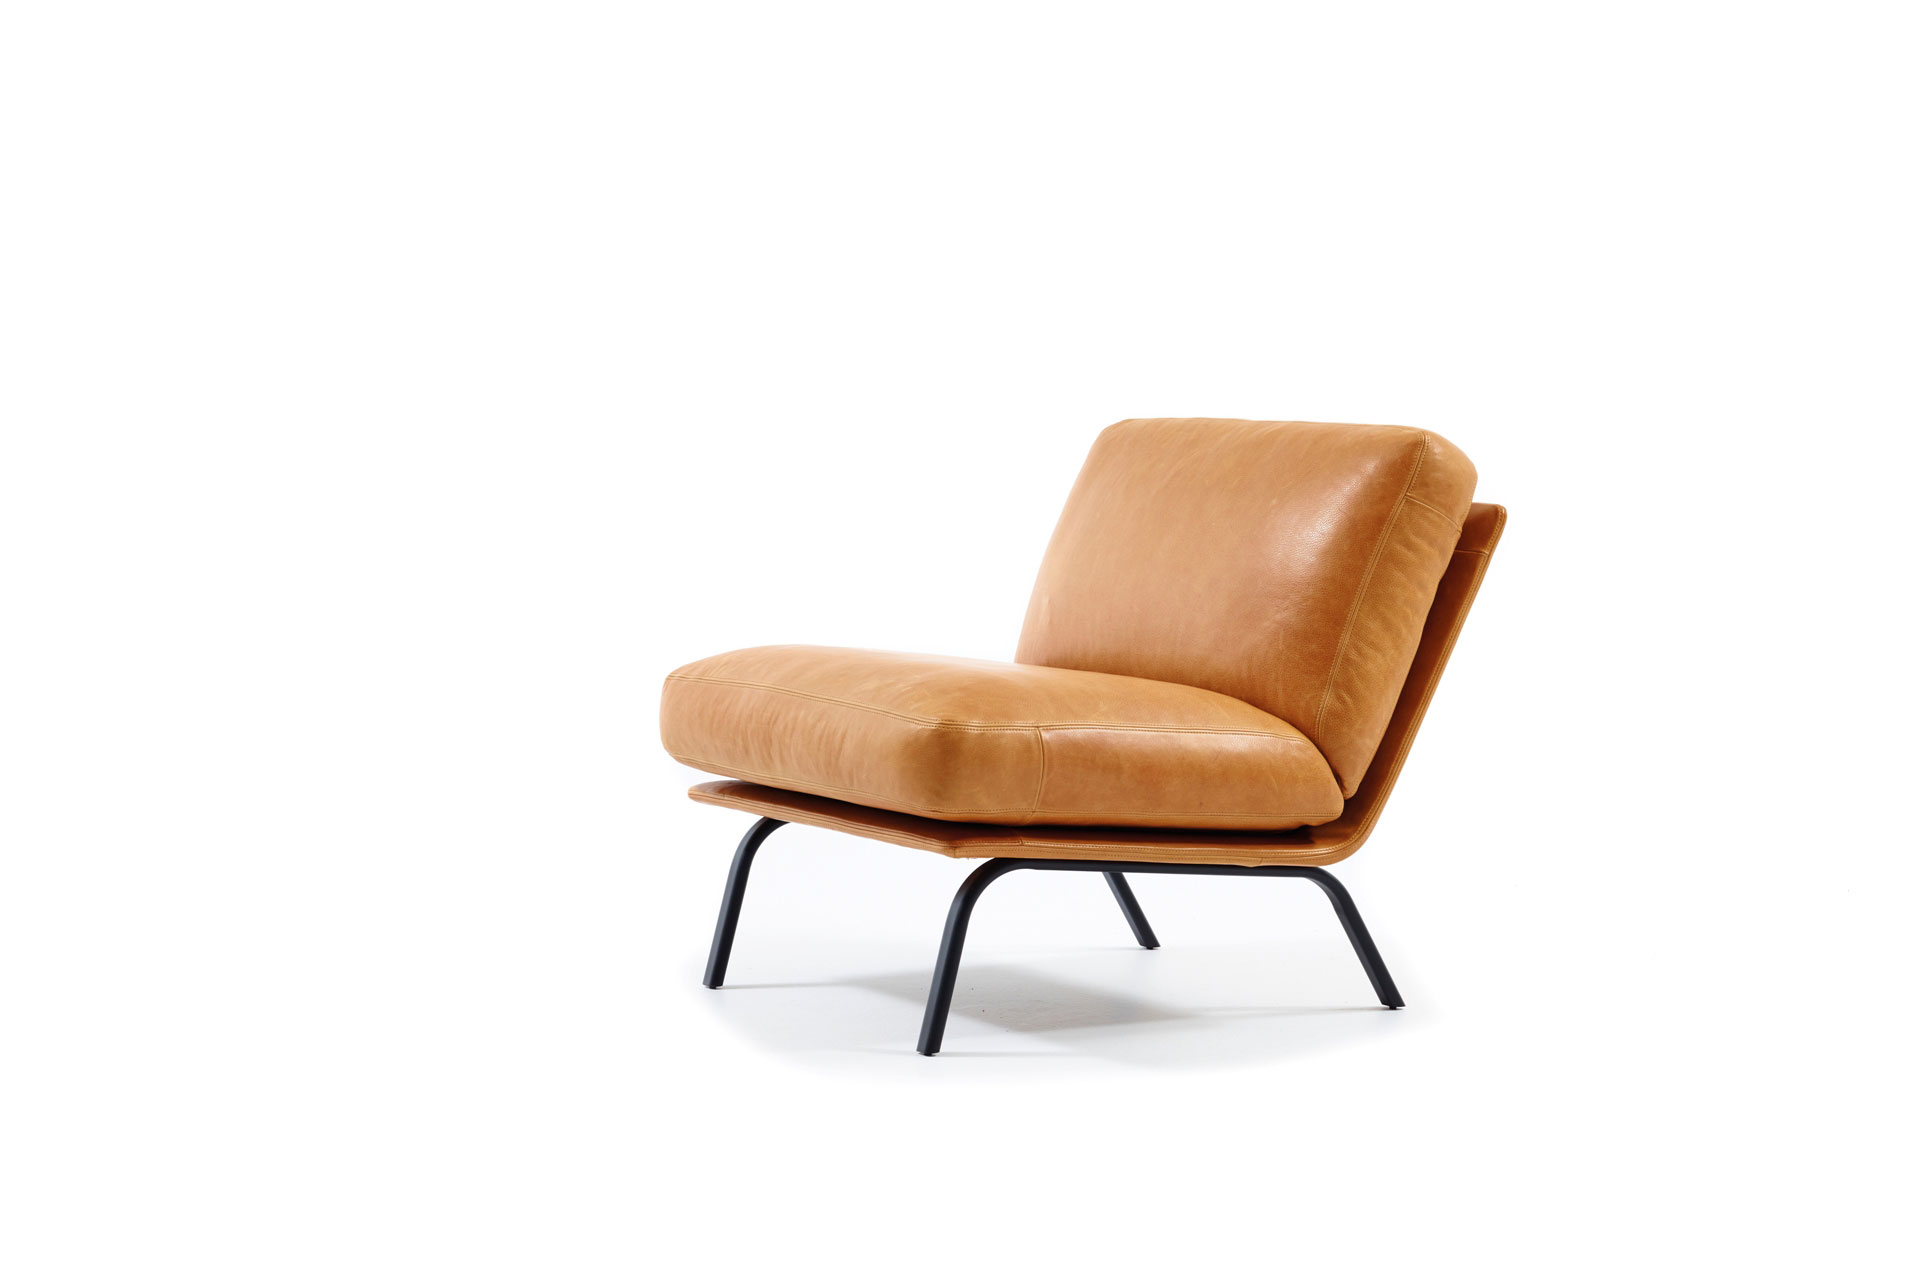 NEWPORT Chair by Alain Monnens for Durlet